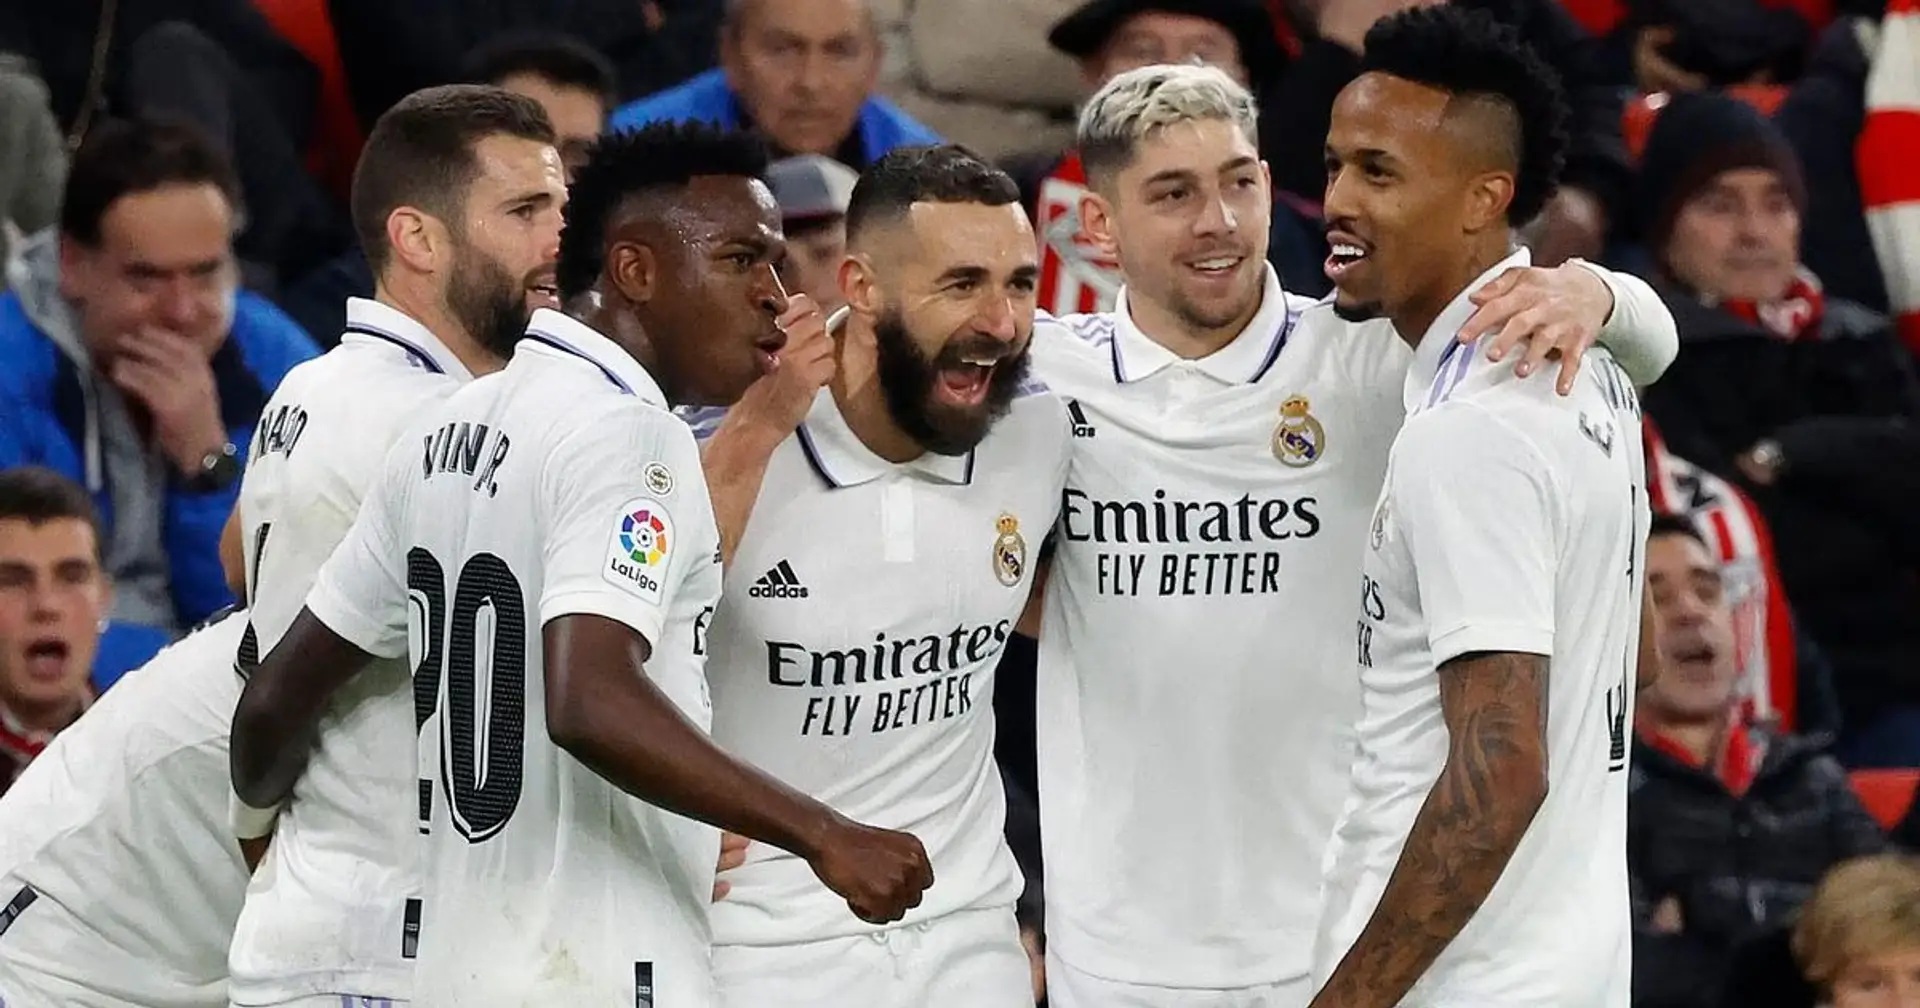 Who are your top 5 Real Madrid players this season?